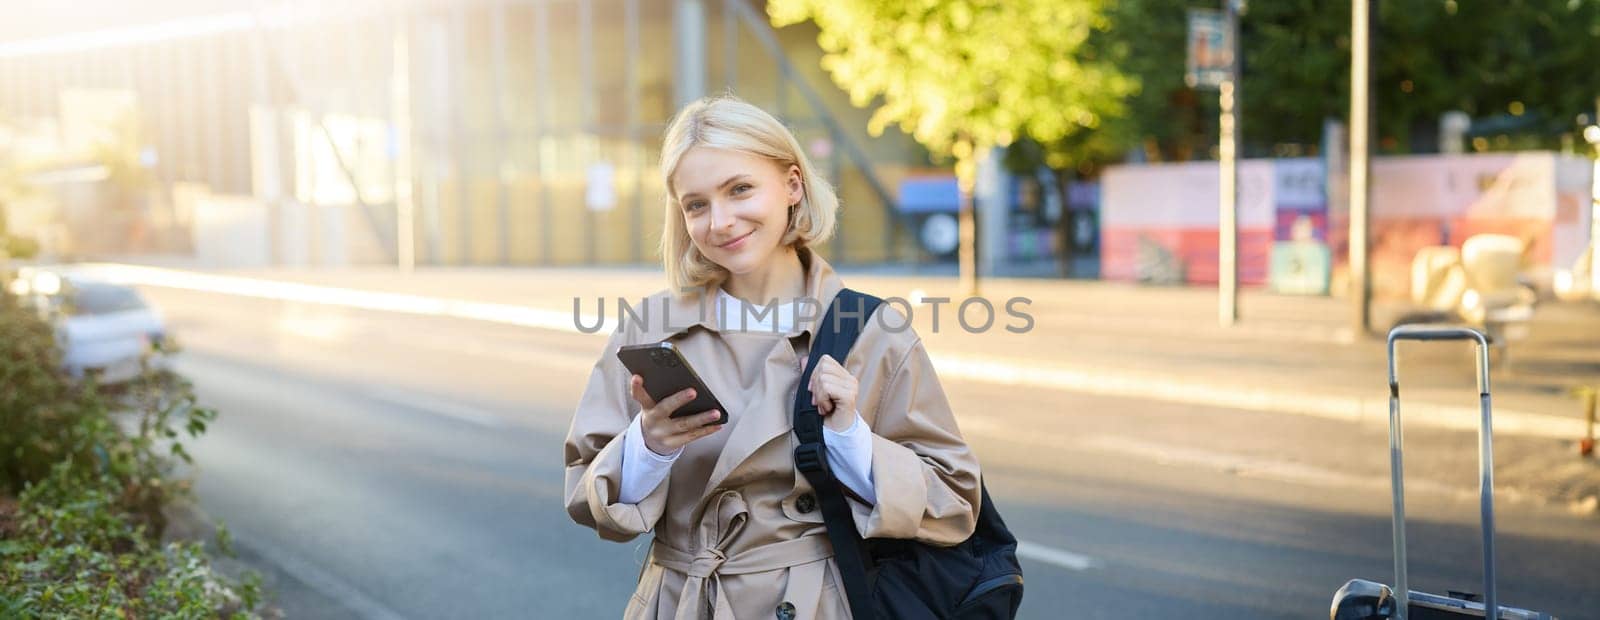 Smiling, beautiful young woman with backpack, holding smartphone, standing on street, using mobile phone app.